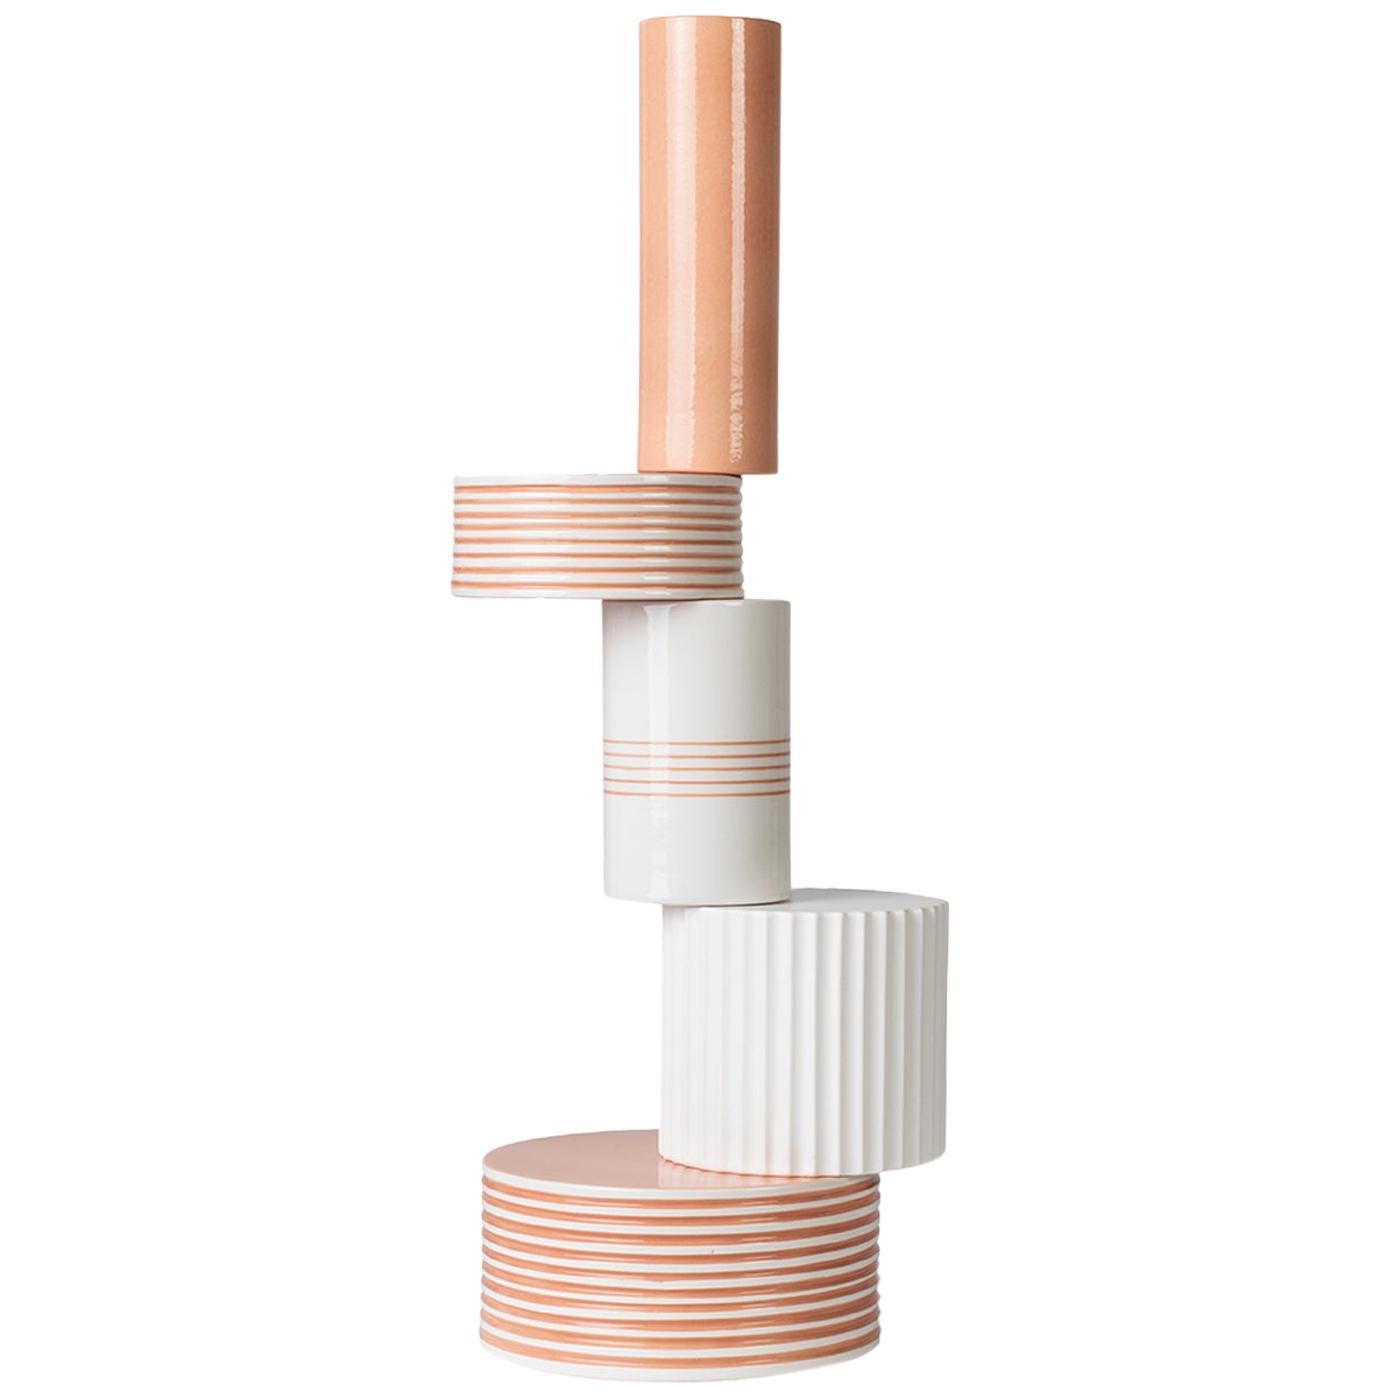 5-Element White and Terracotta Vase by Quincoces-Dragò  For Sale